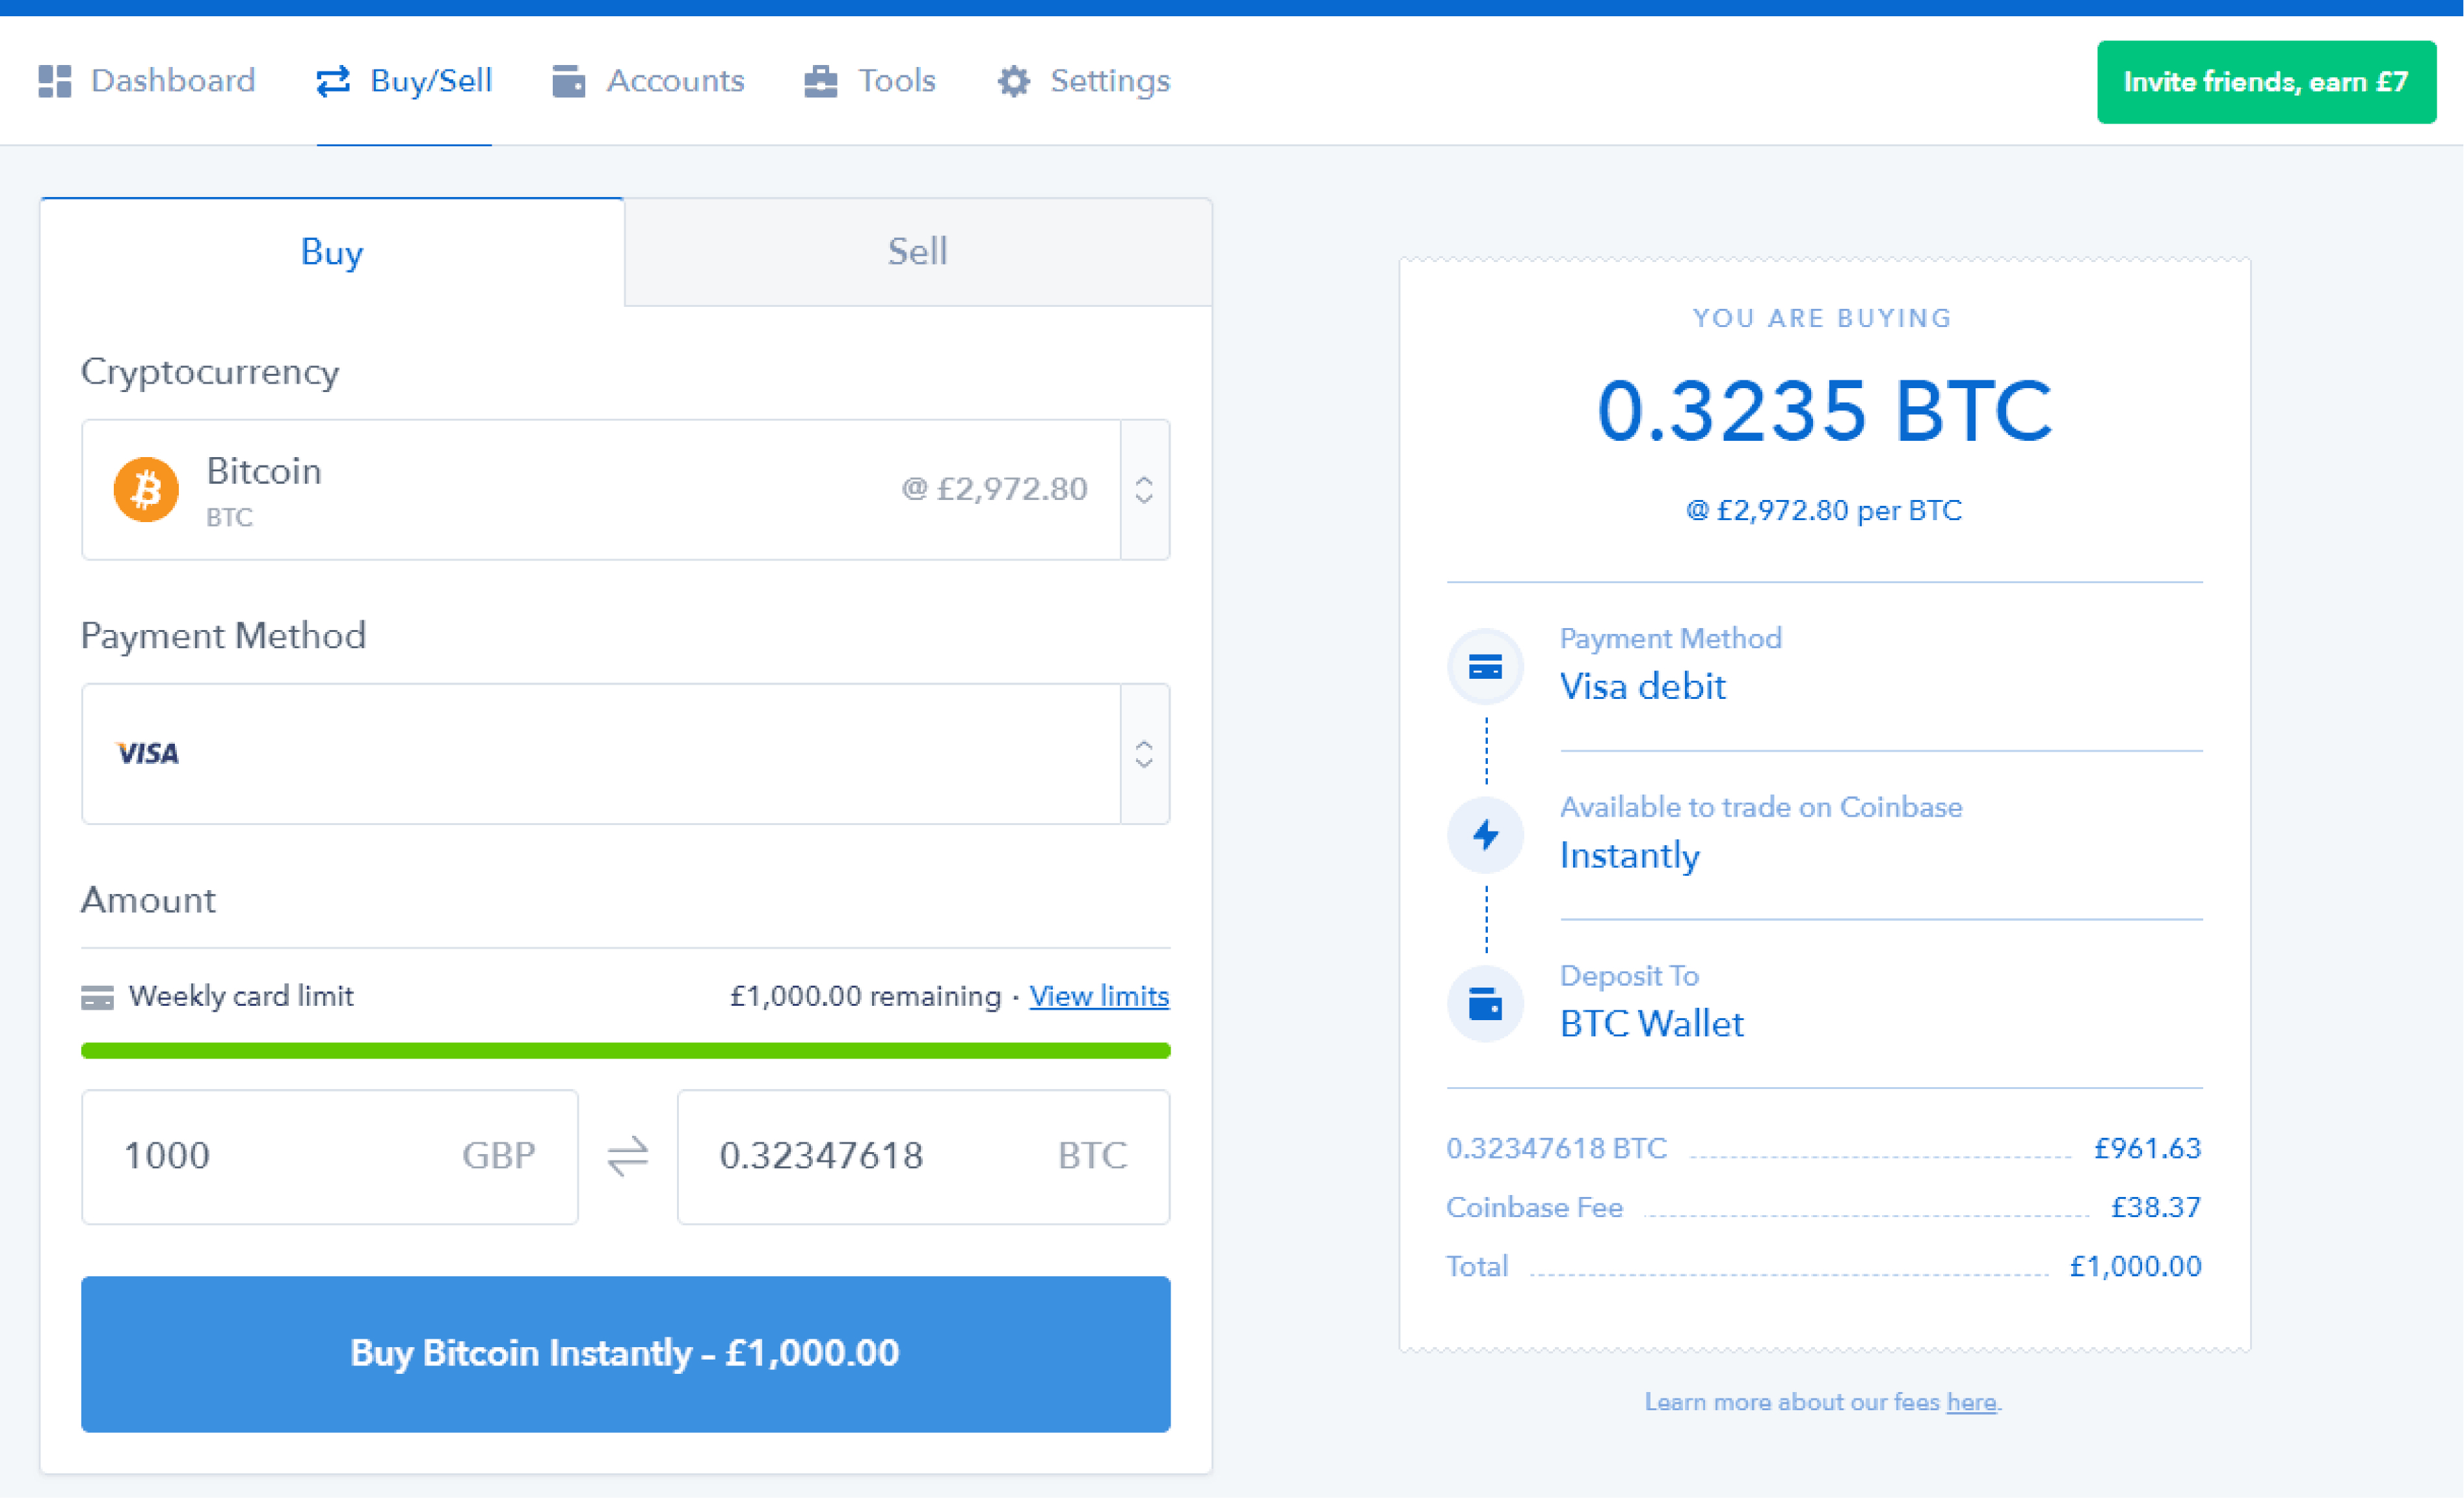 cheapest crypto you can buy on coinbase